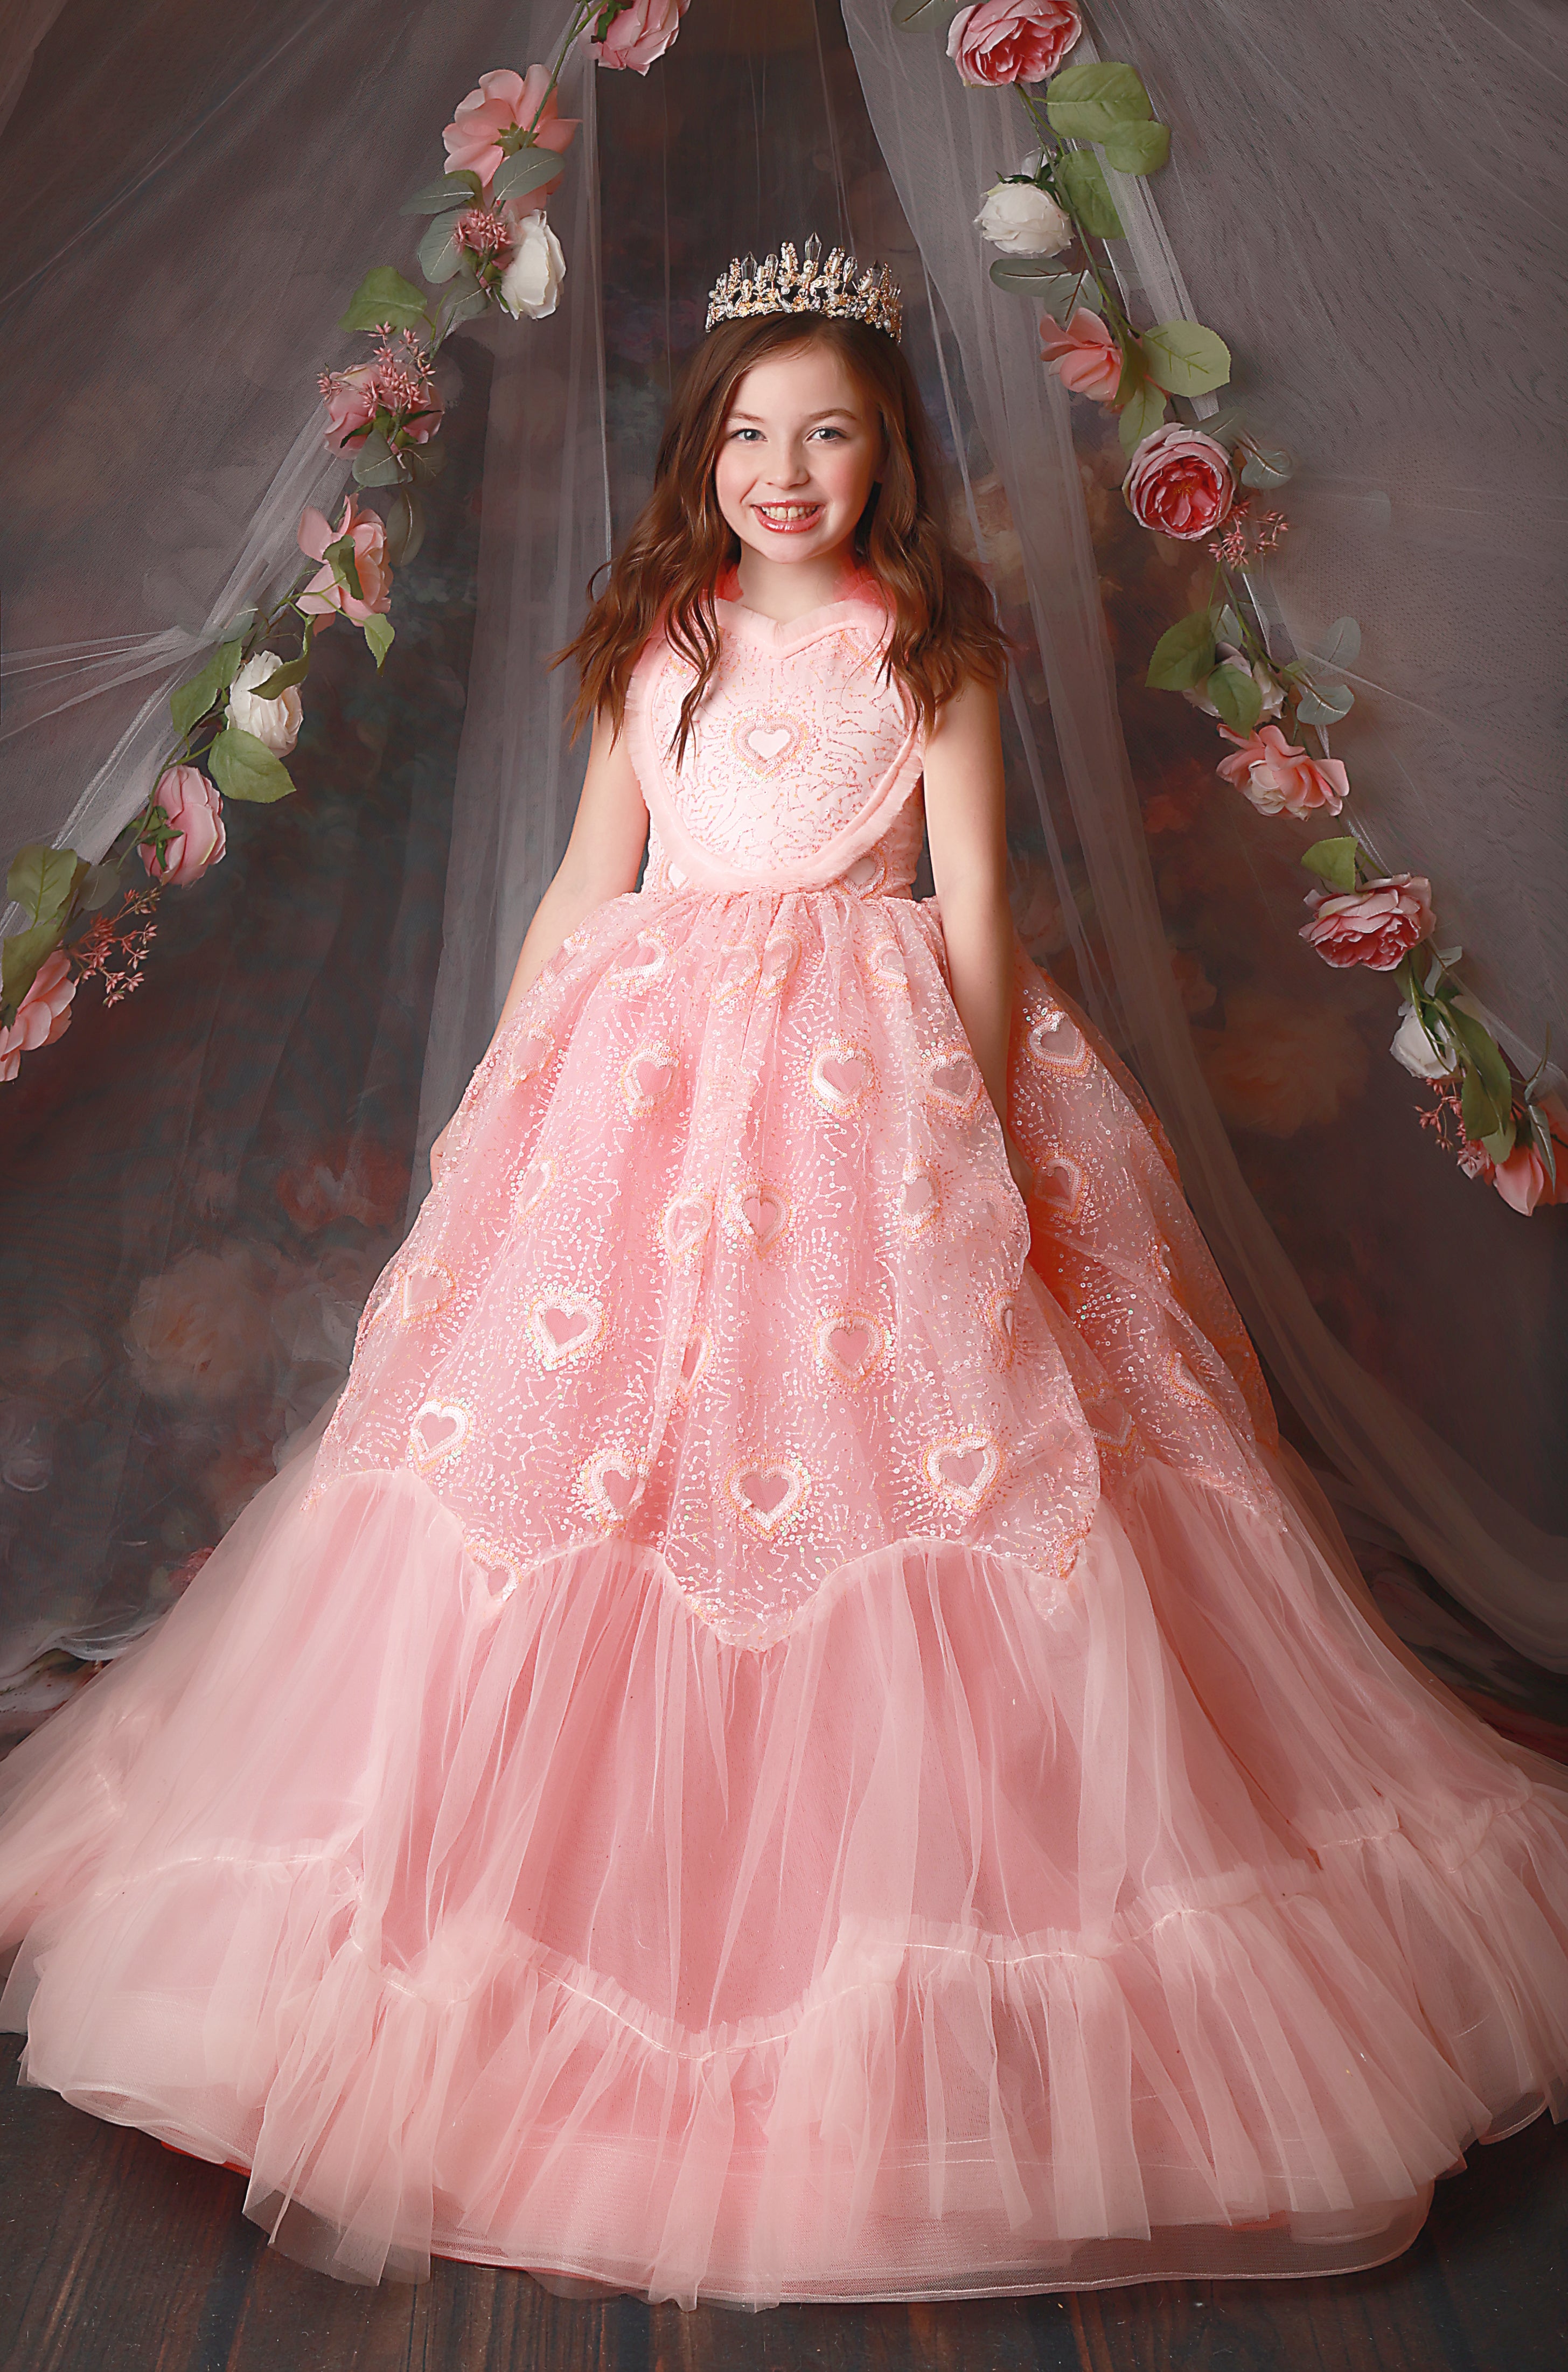 Discover a world of style and sophistication for your little princess in our couture gown collection.